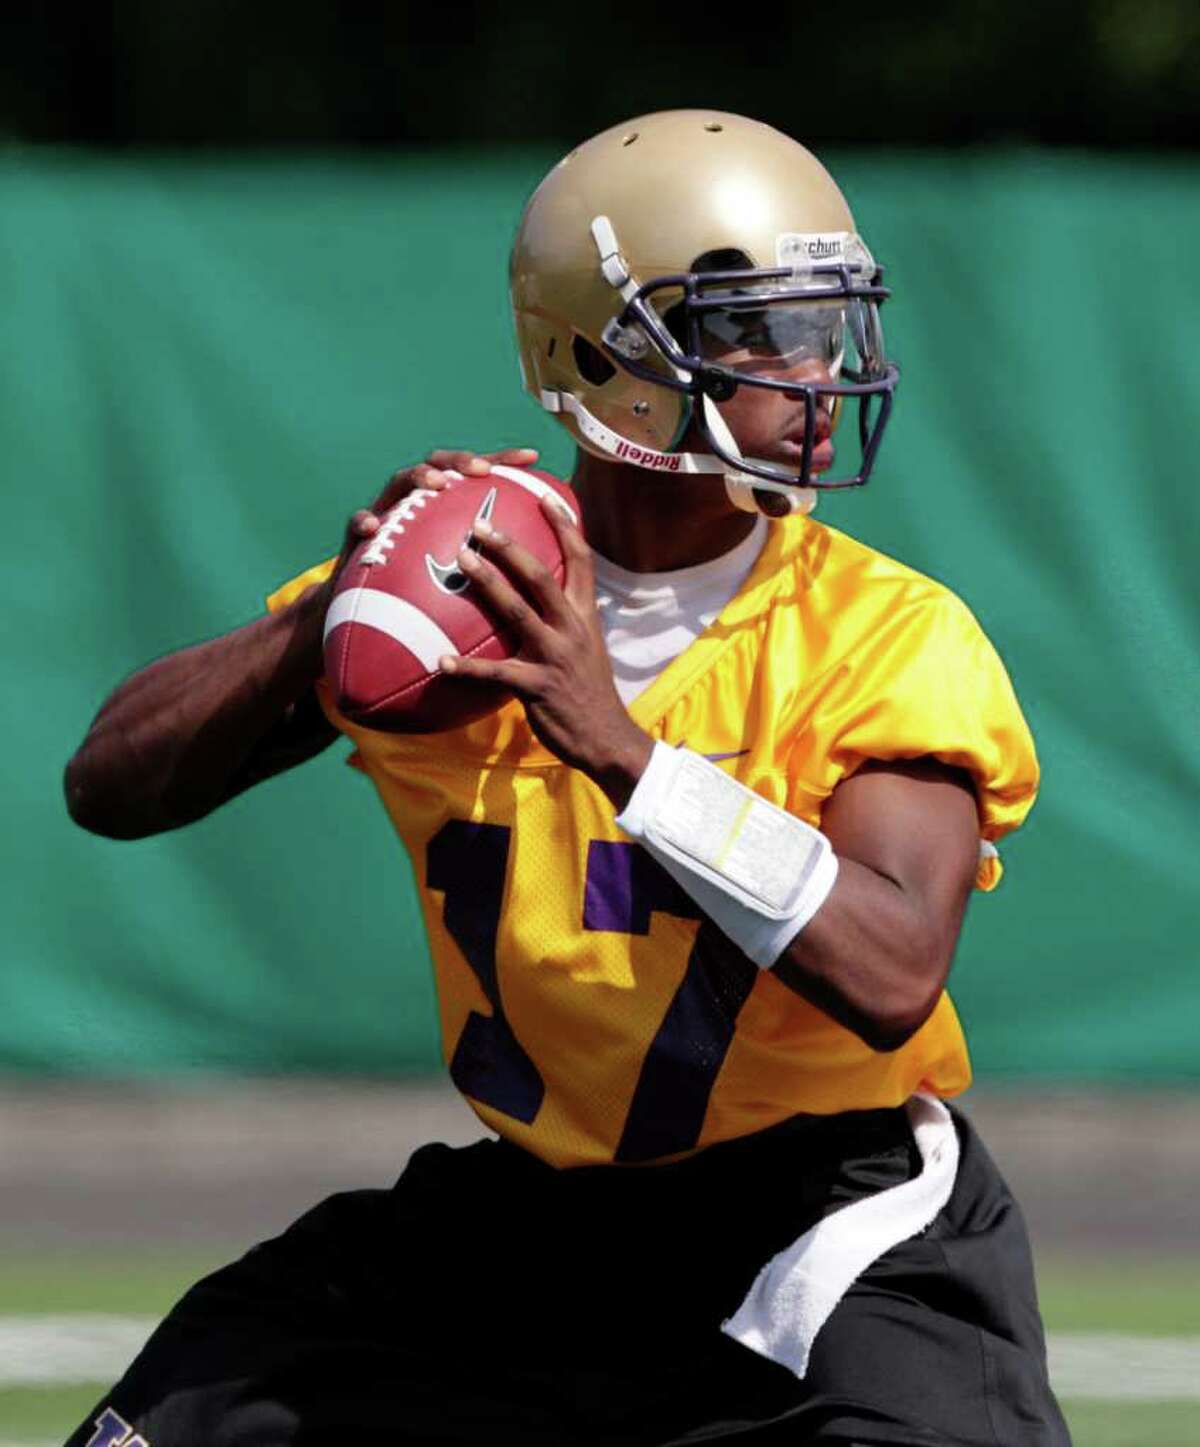 Washington quarterback Keith Price drops back to pass during the NCAA college football team's first practice of the season, Monday, Aug. 8, 2011, in Seattle.